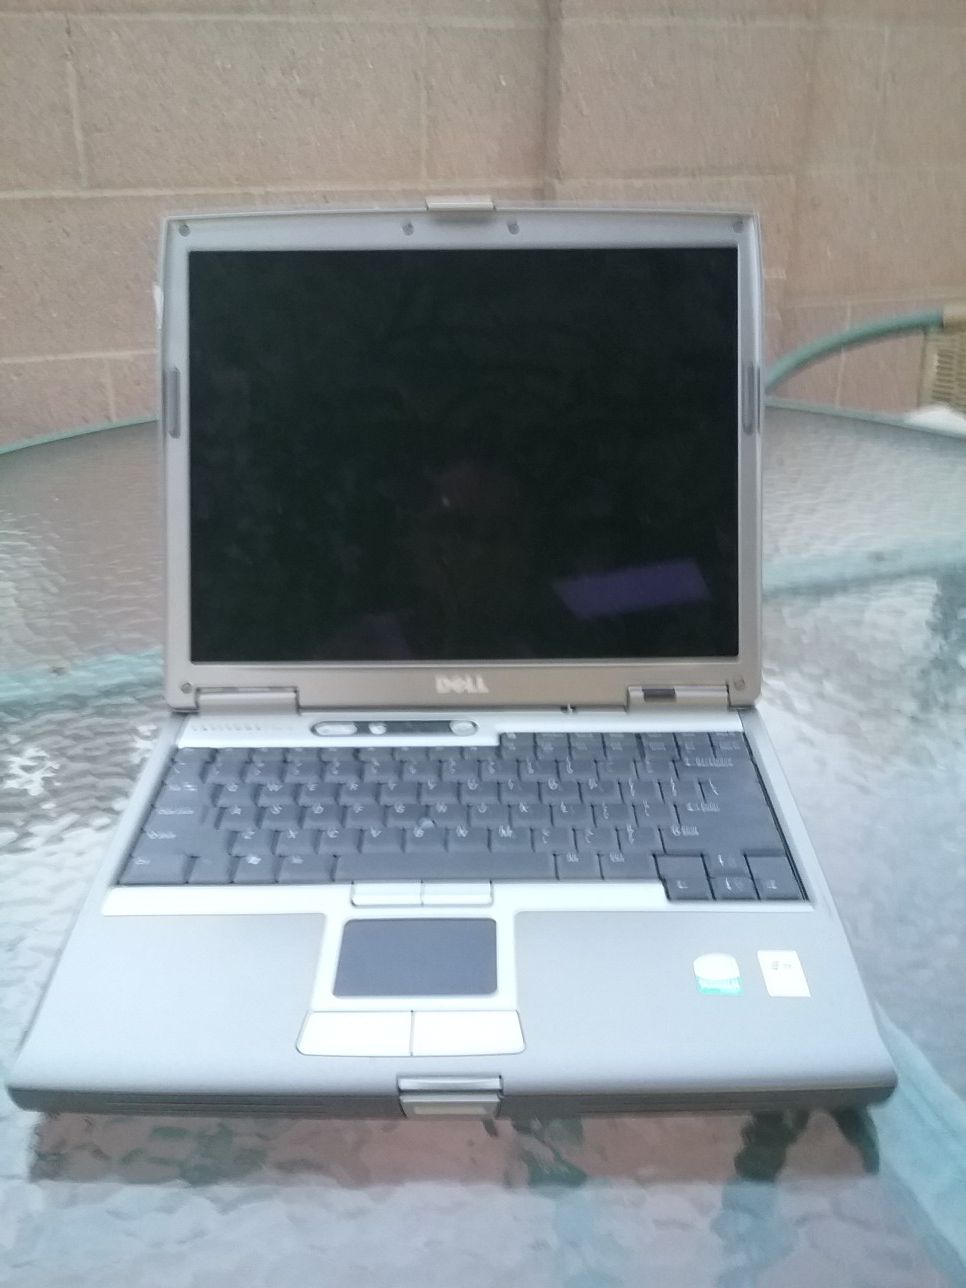 3 Dell Latitude D610 Laptops, missing hard drive and no charger